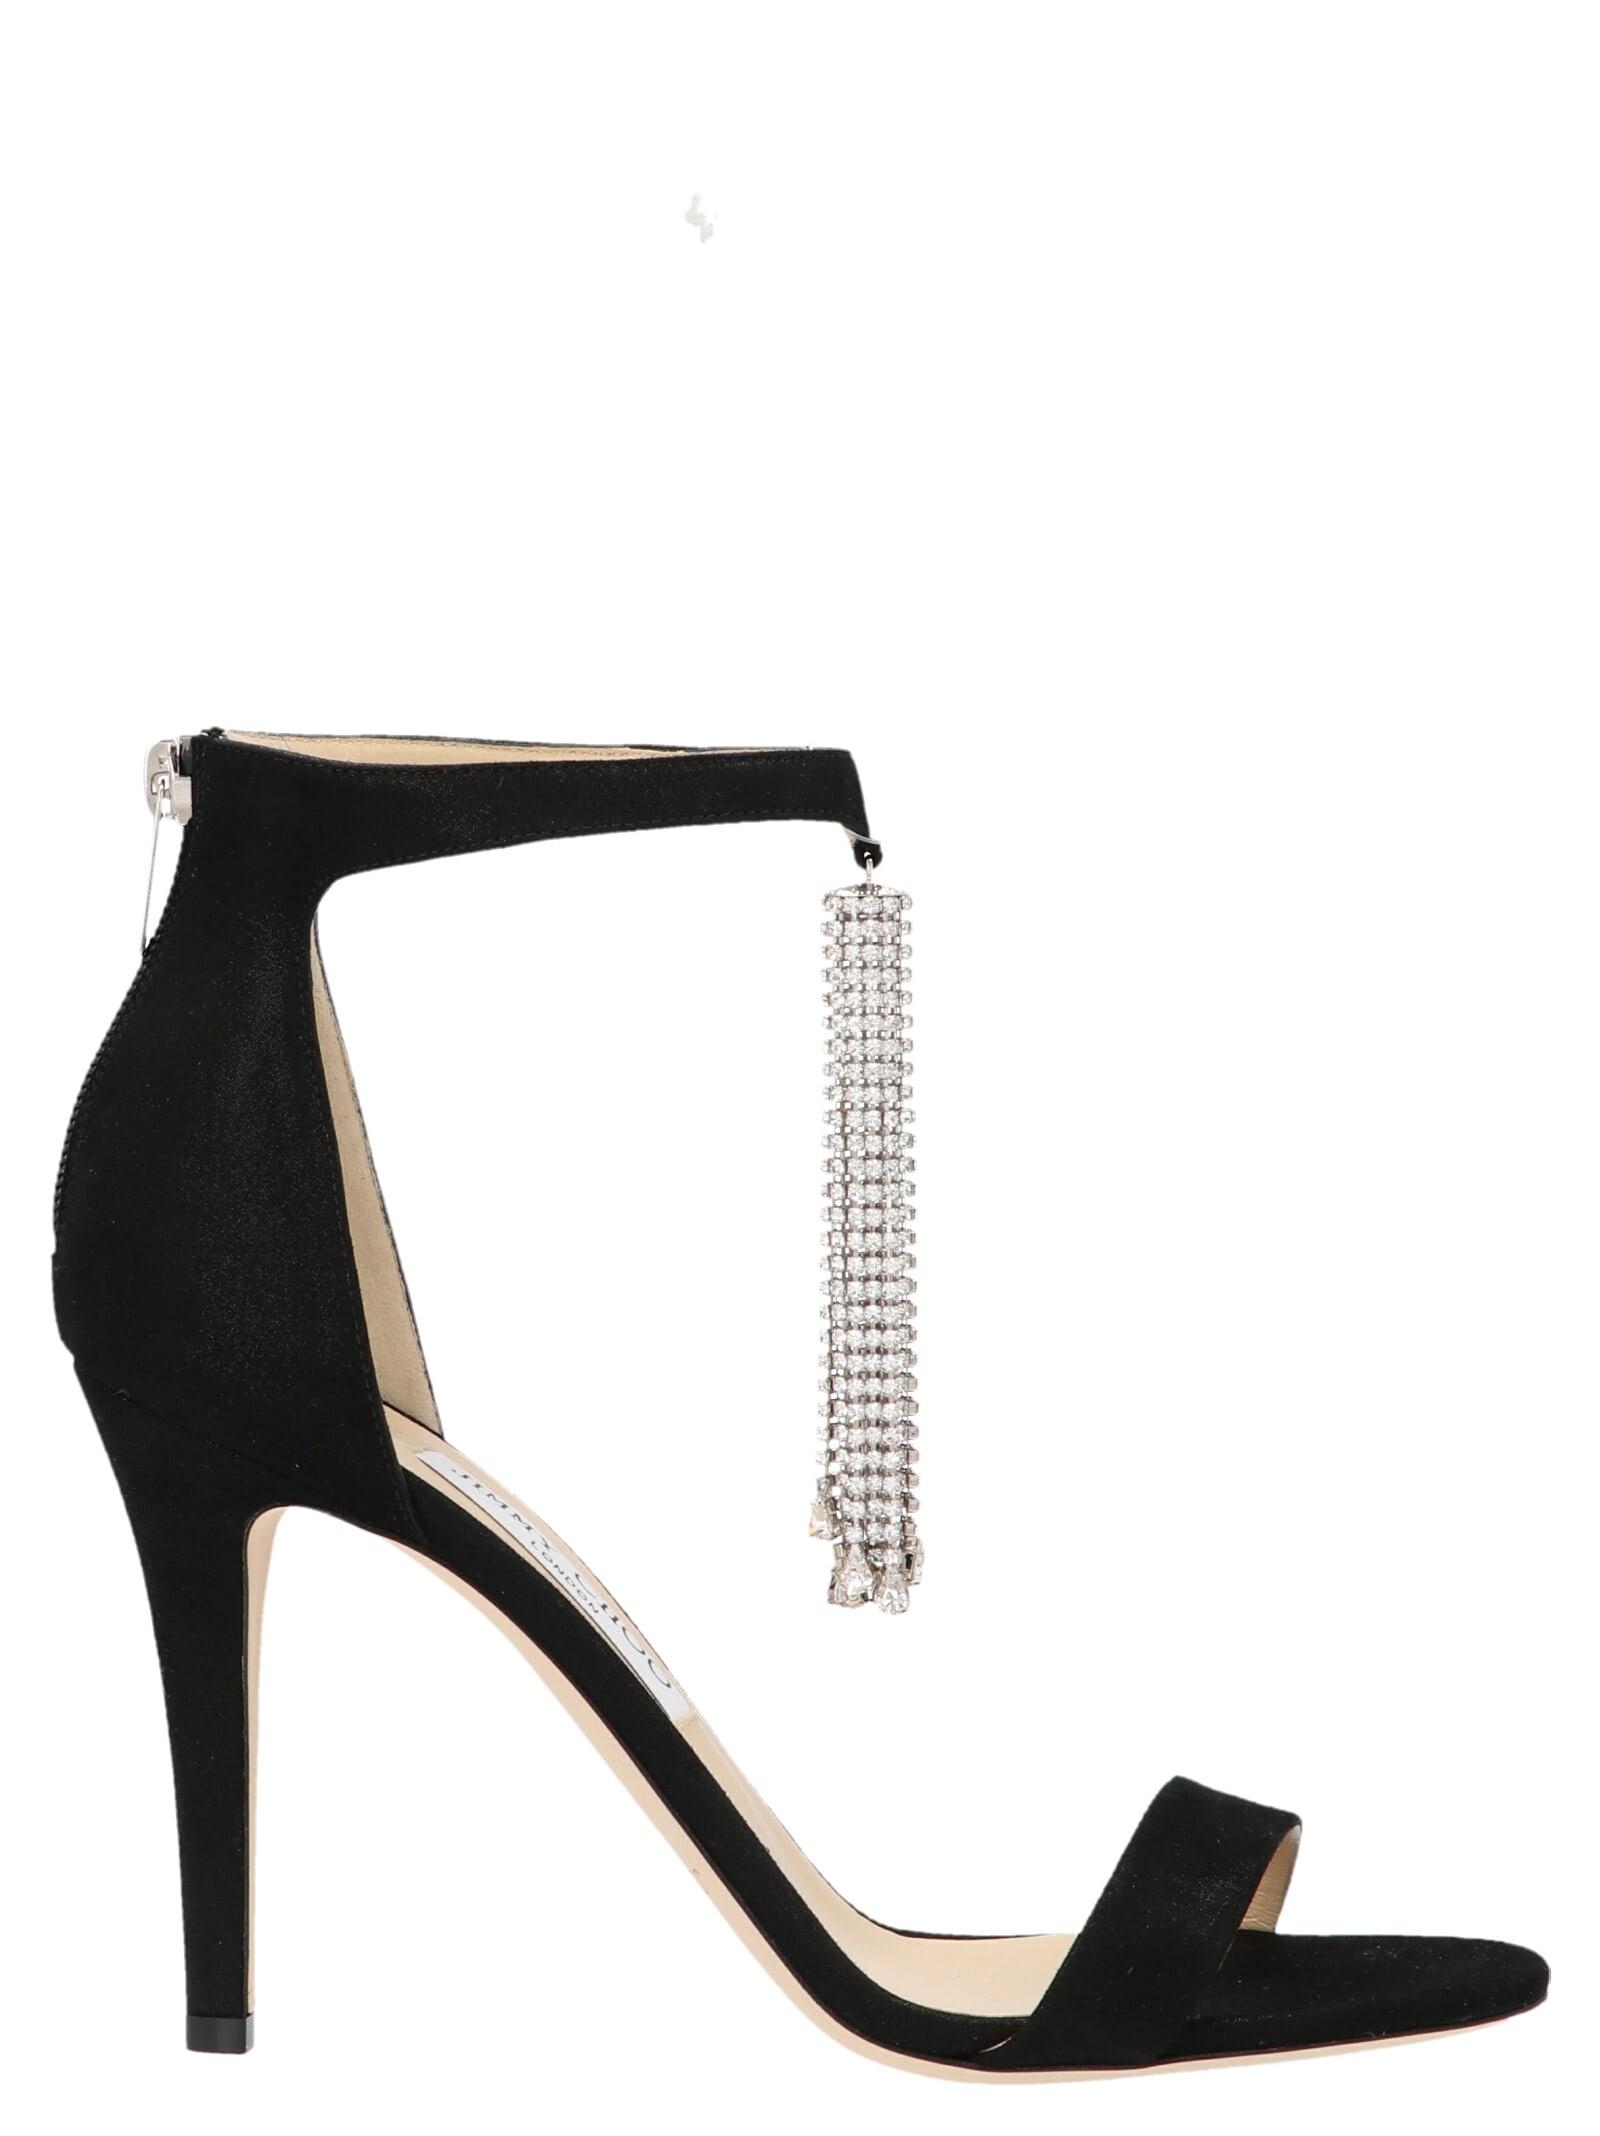 Buy Jimmy Choo viola Shoes online, shop Jimmy Choo shoes with free shipping